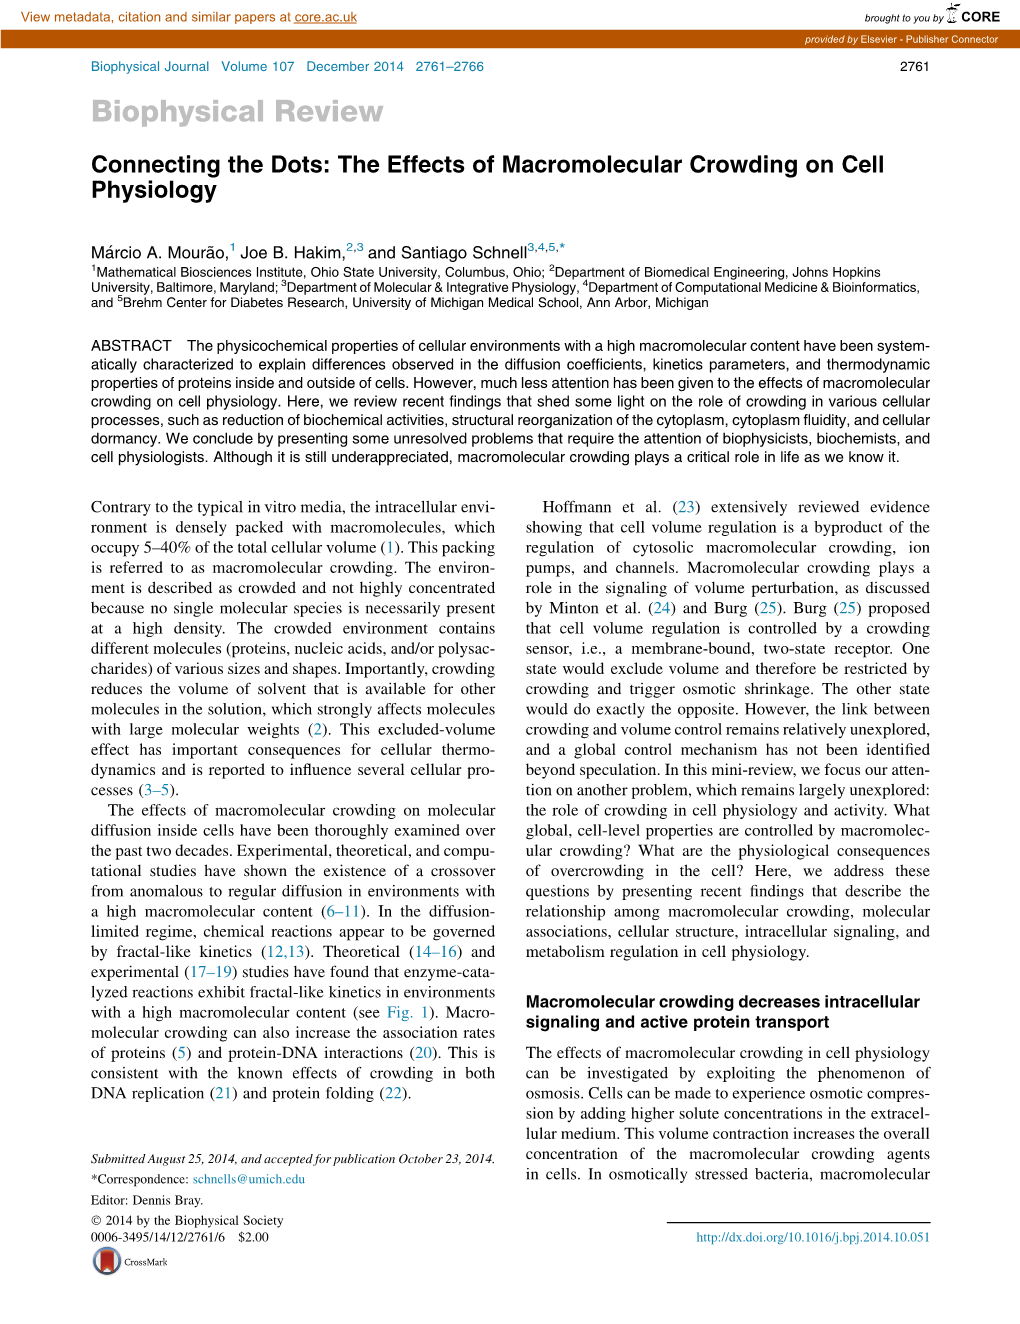 The Effects of Macromolecular Crowding on Cell Physiology